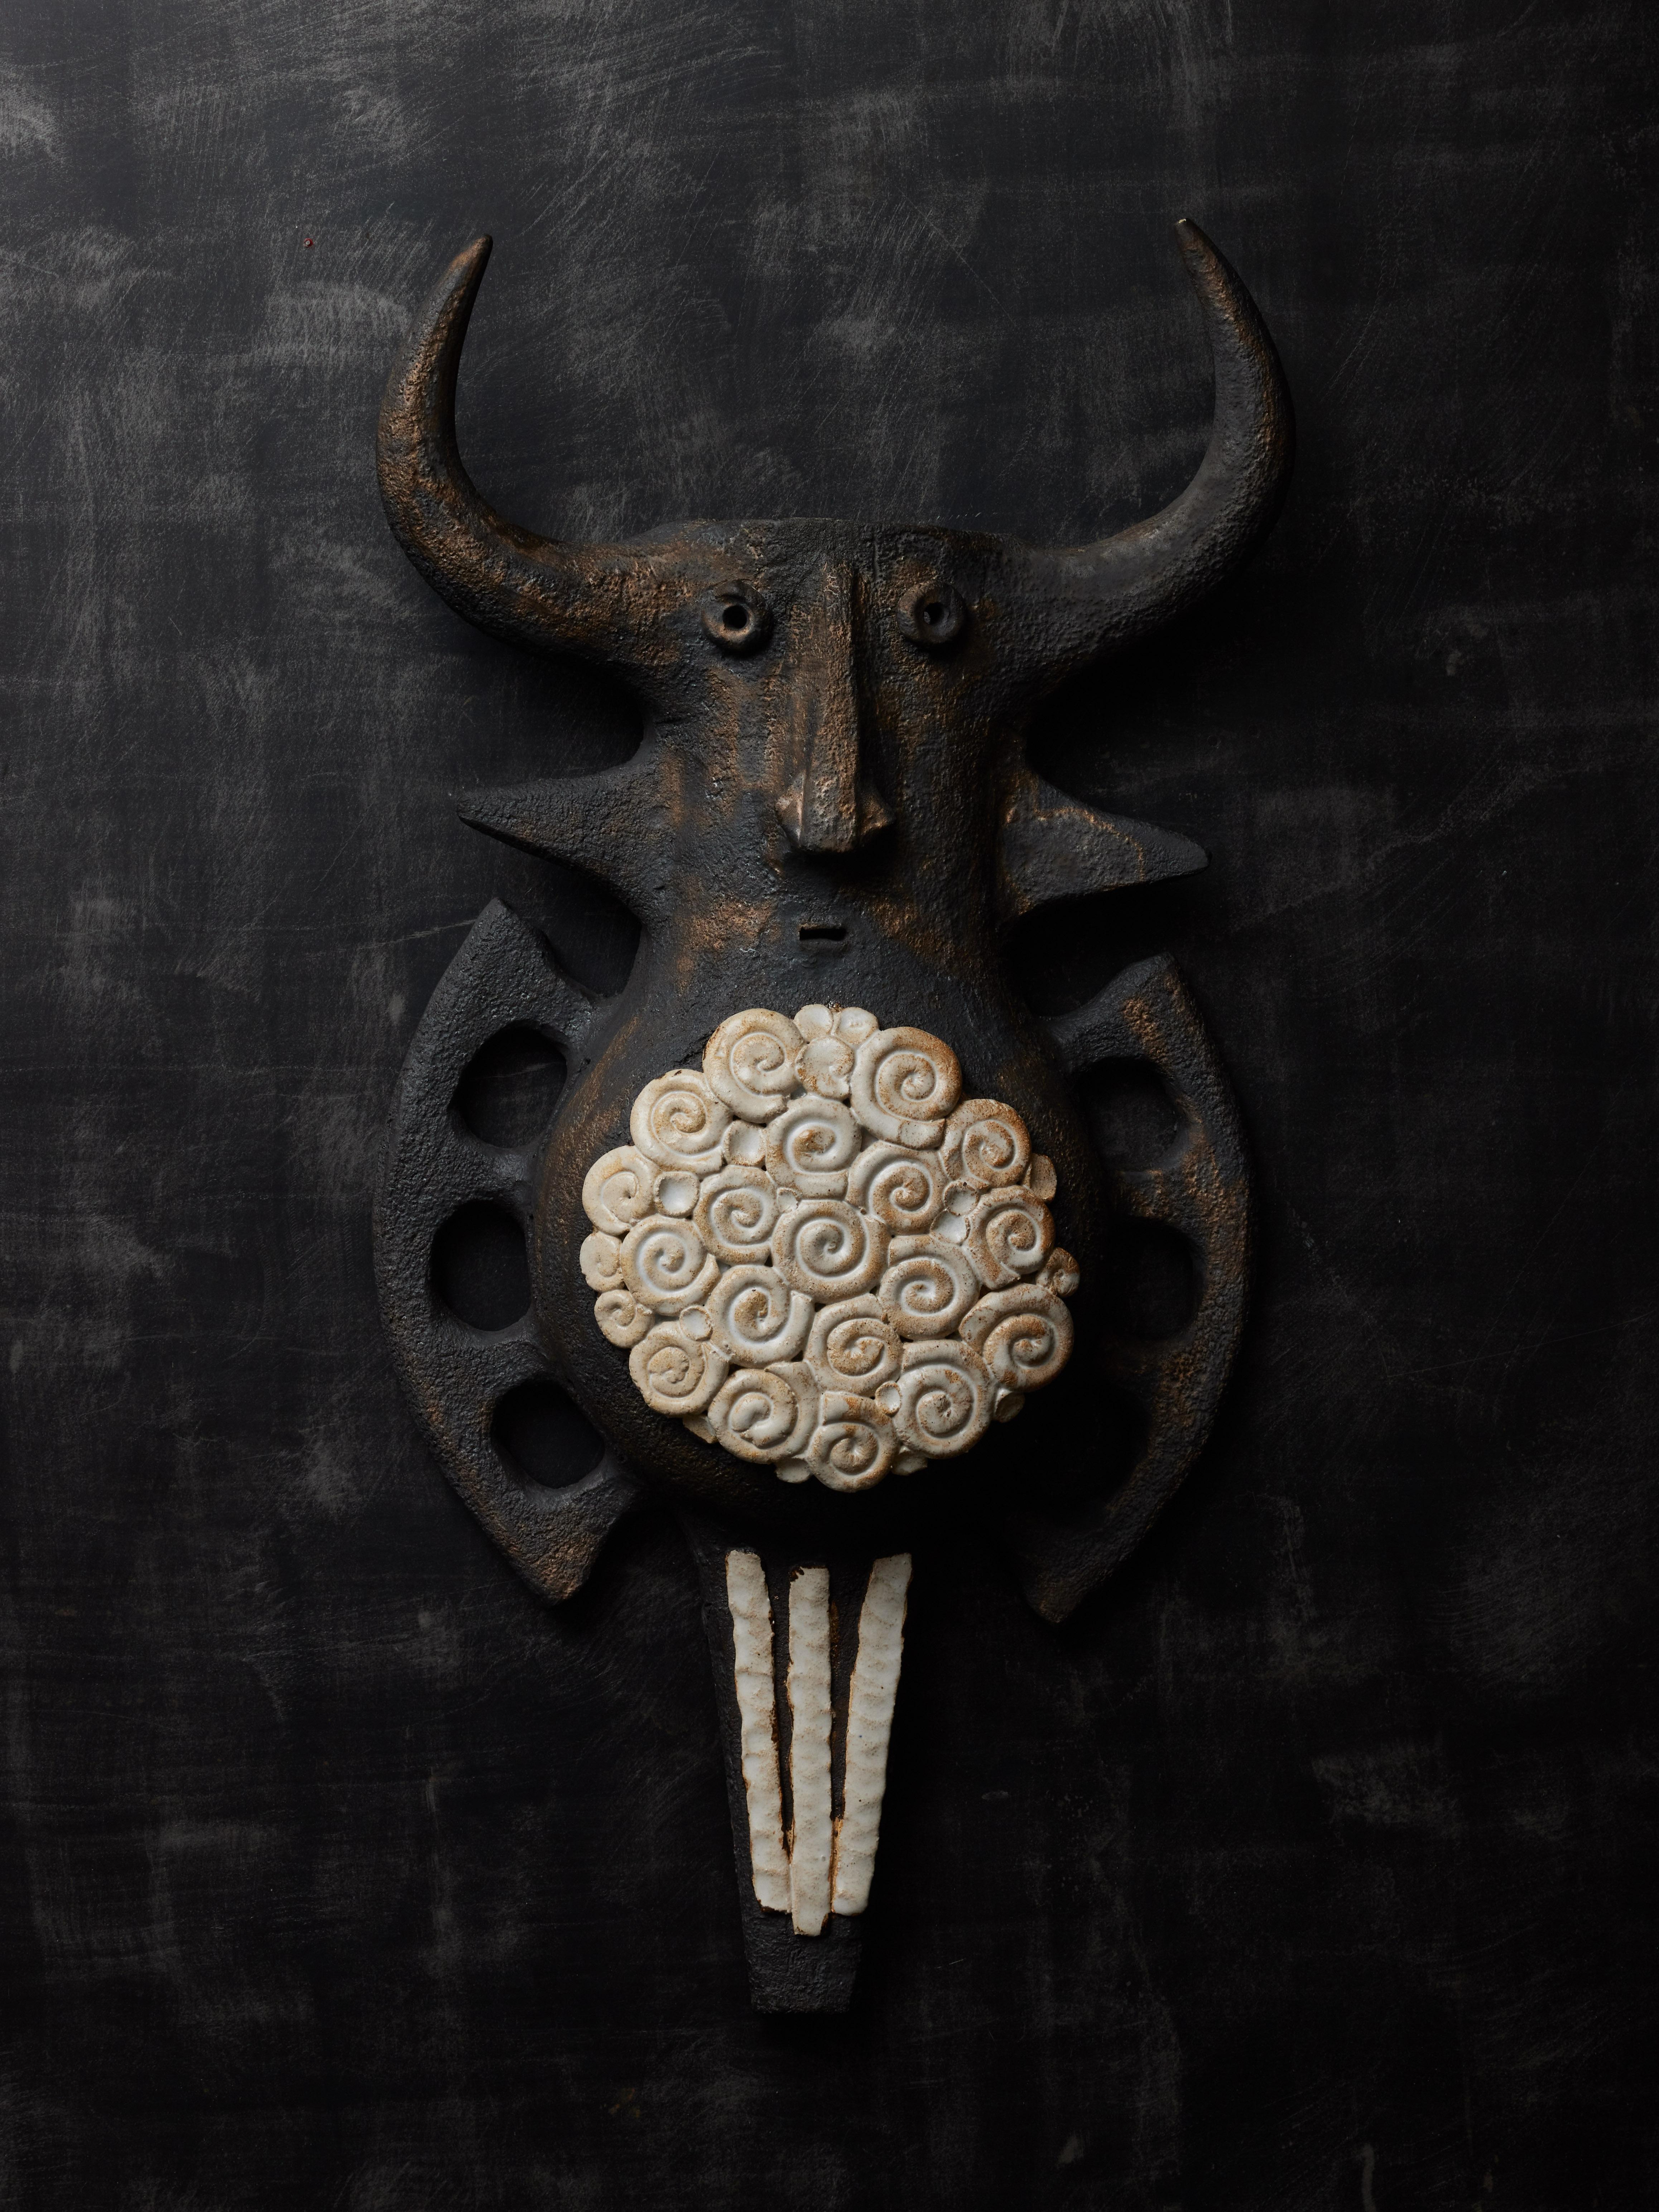 Beautiful example of the French ceramic artist Dominic Pouchain, this pair of Toro wall sconces in dark ceramic with white accent representing an imaginary animal inspired by a bull.
Both pieces are signed

Dominique Pouchain – Born in